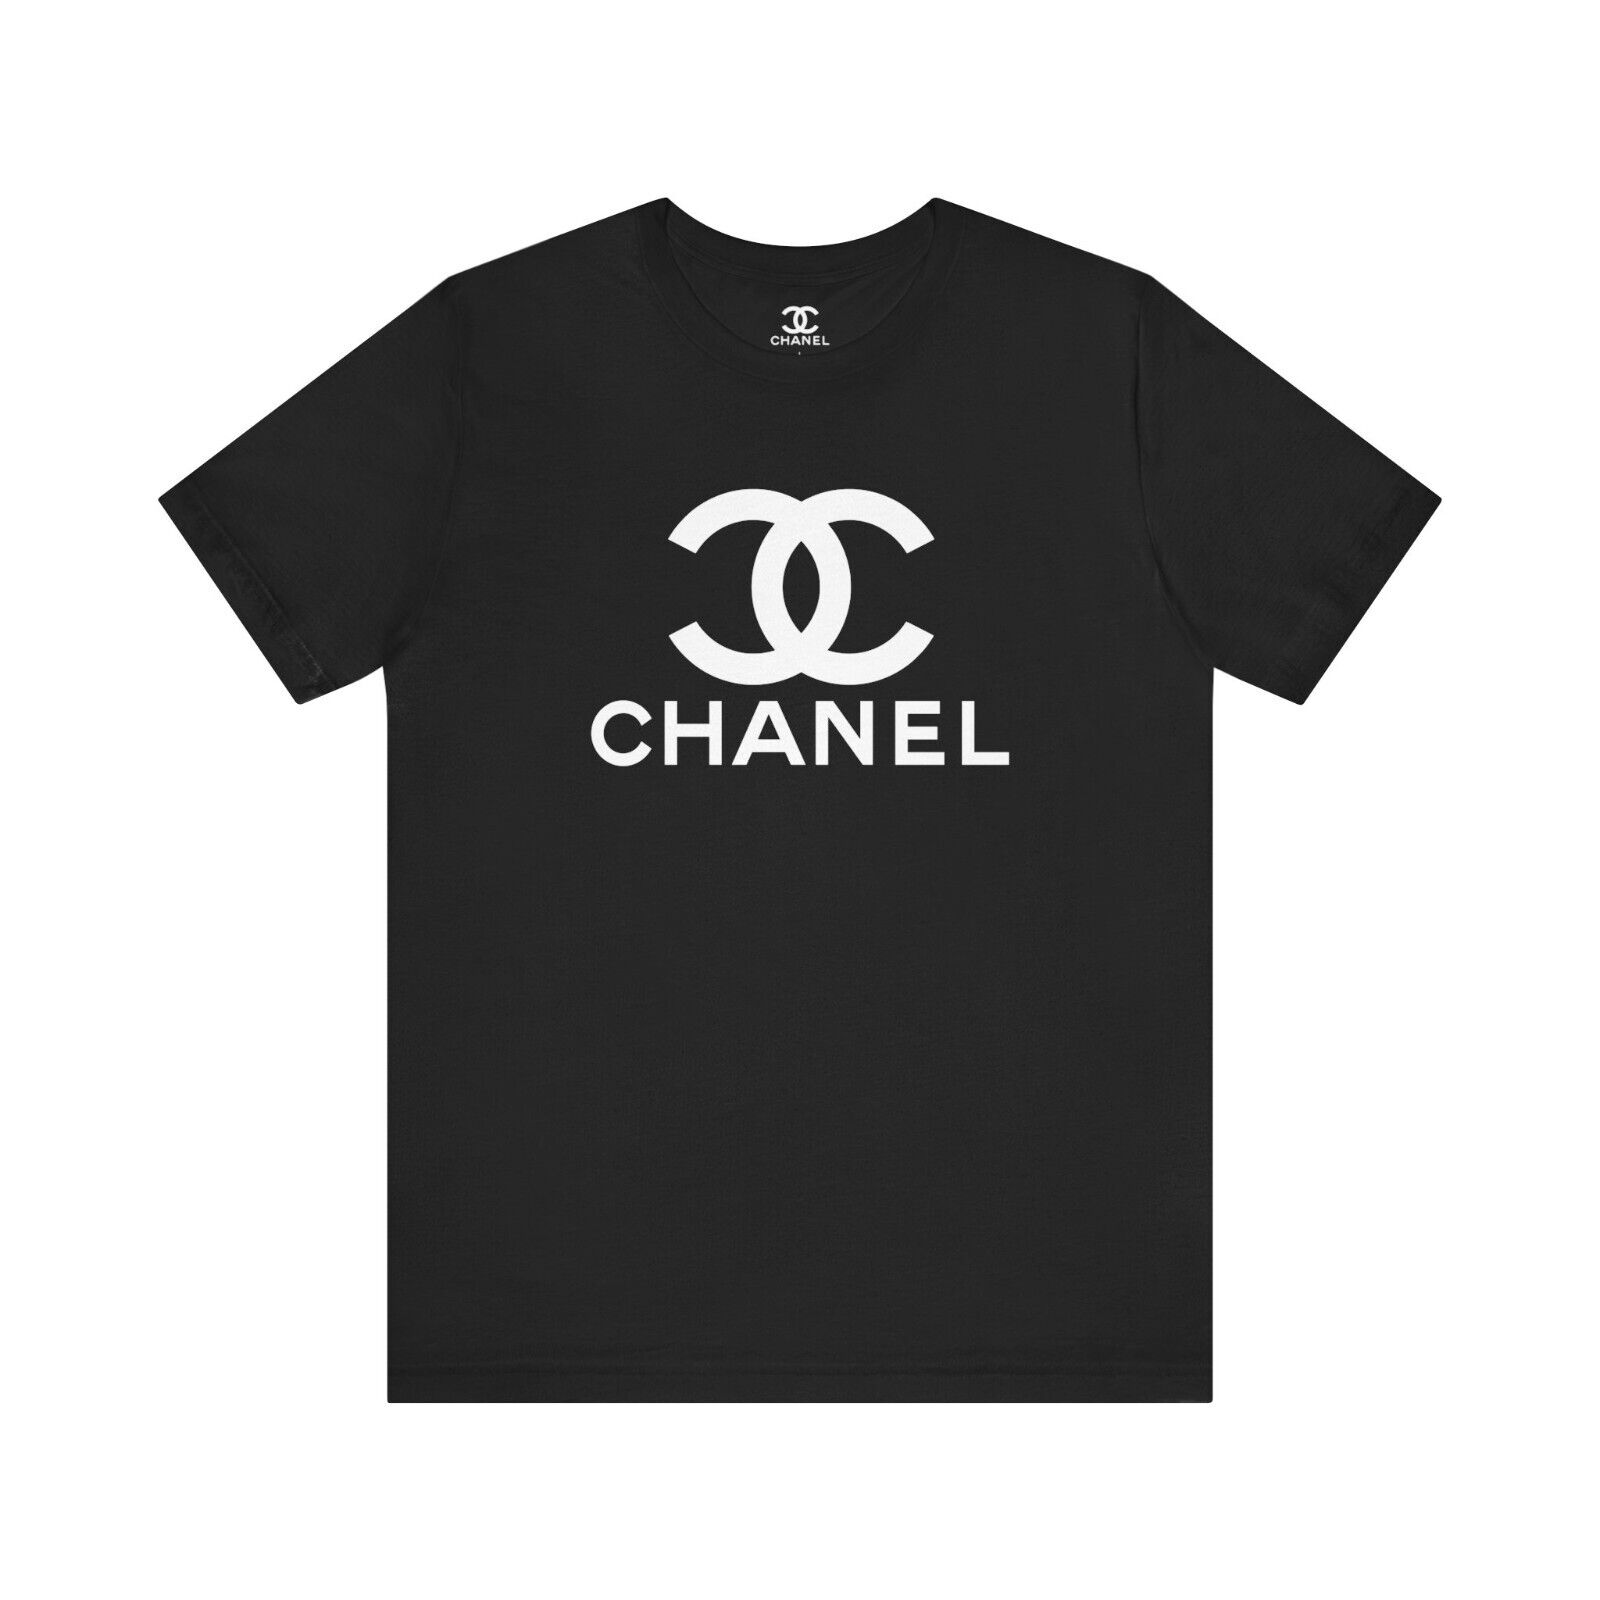 New CHANEL Vintage Limited Edition Logo Men\'s T-Shirt Tee Size S-5XL USA HOT